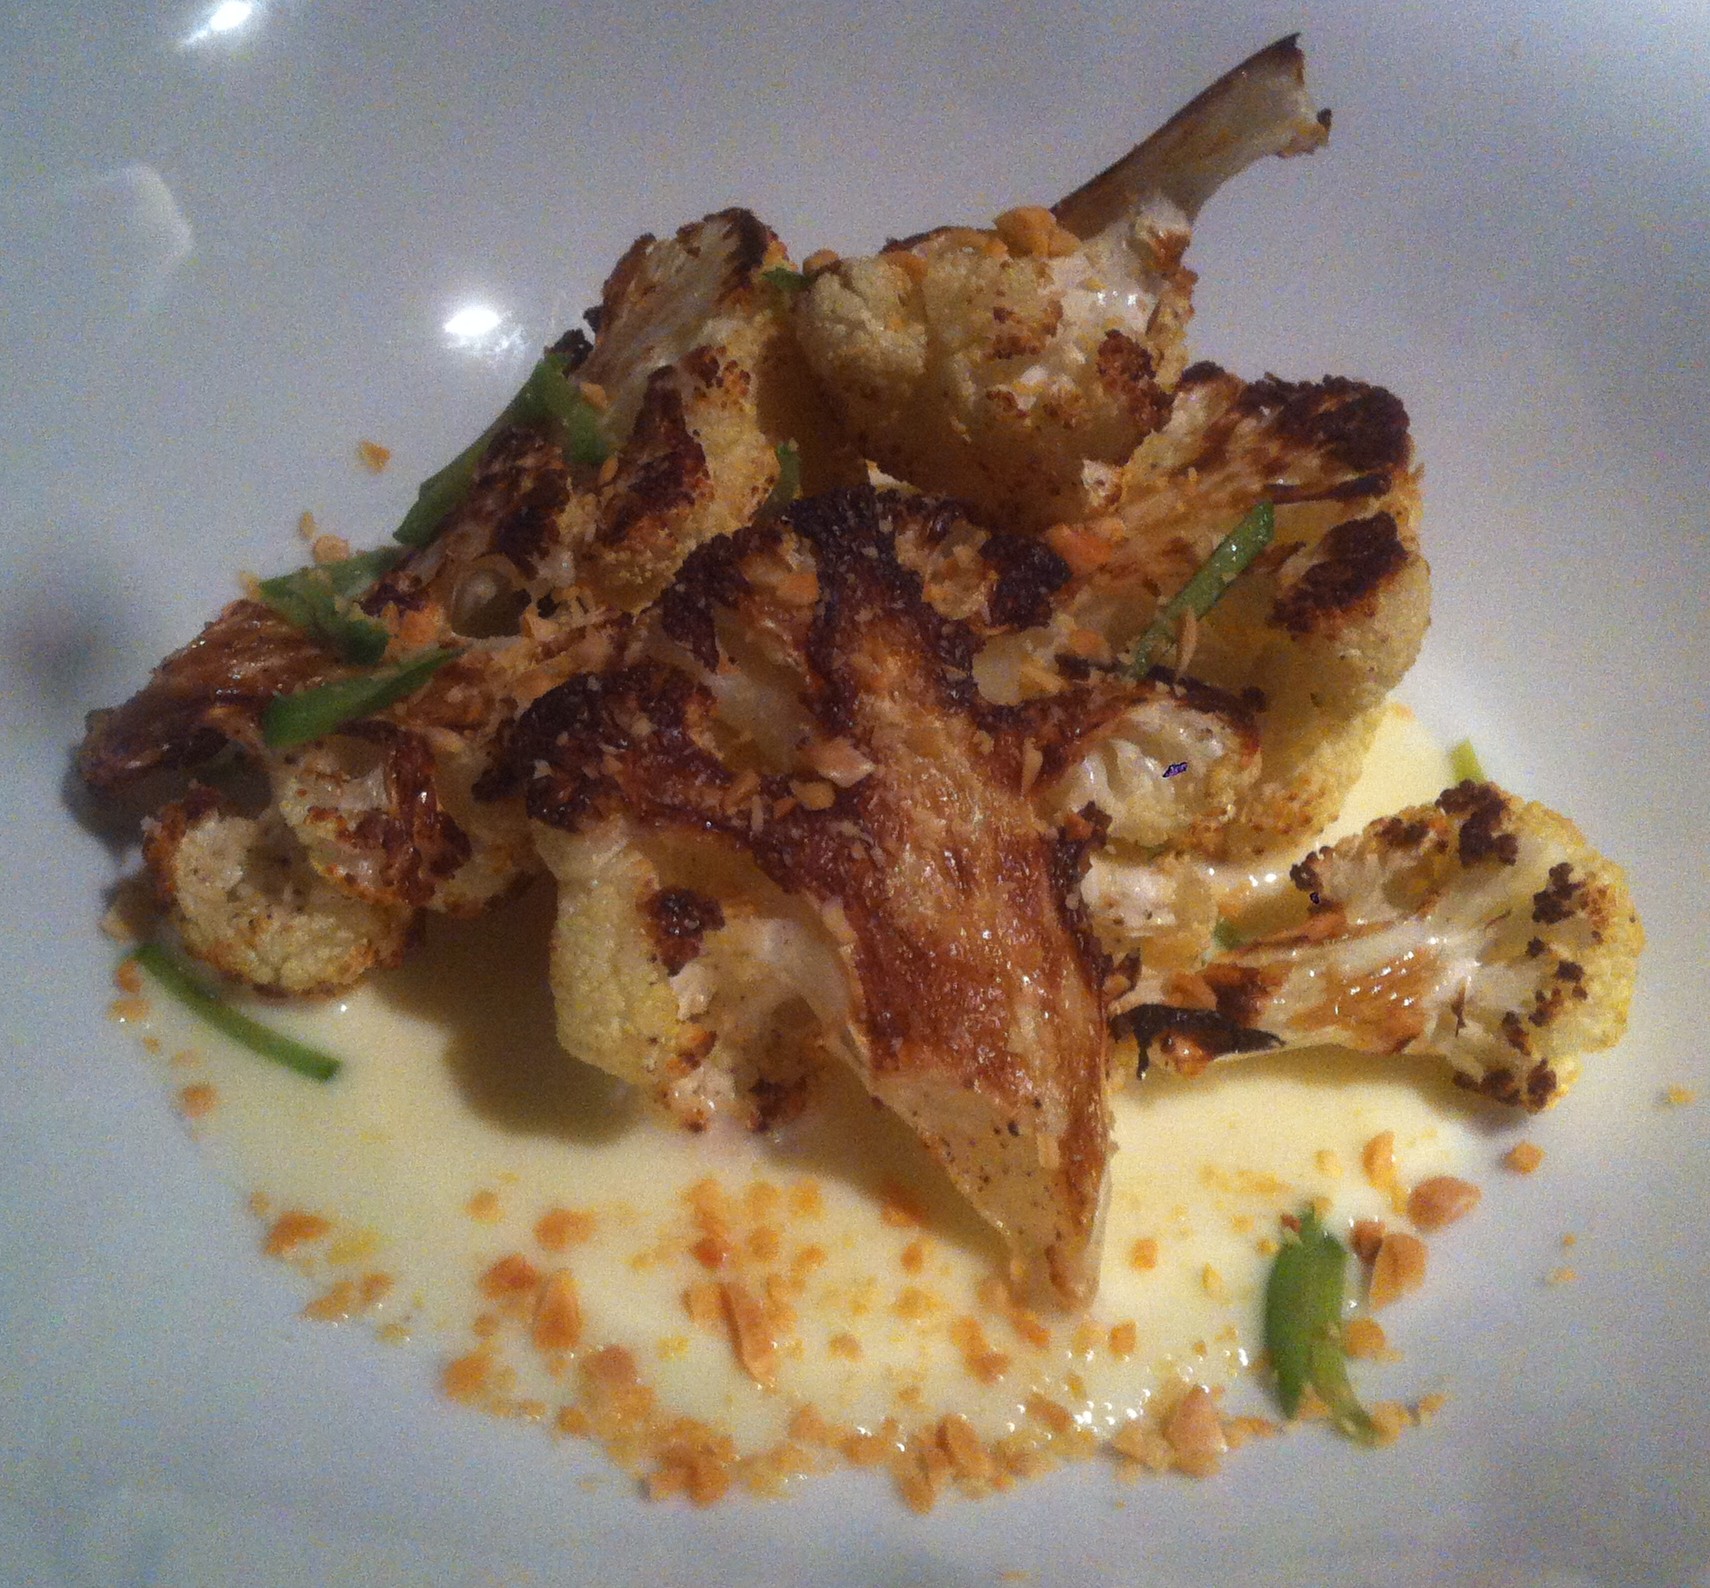 Roasted Cauliflower at The Blind Monk